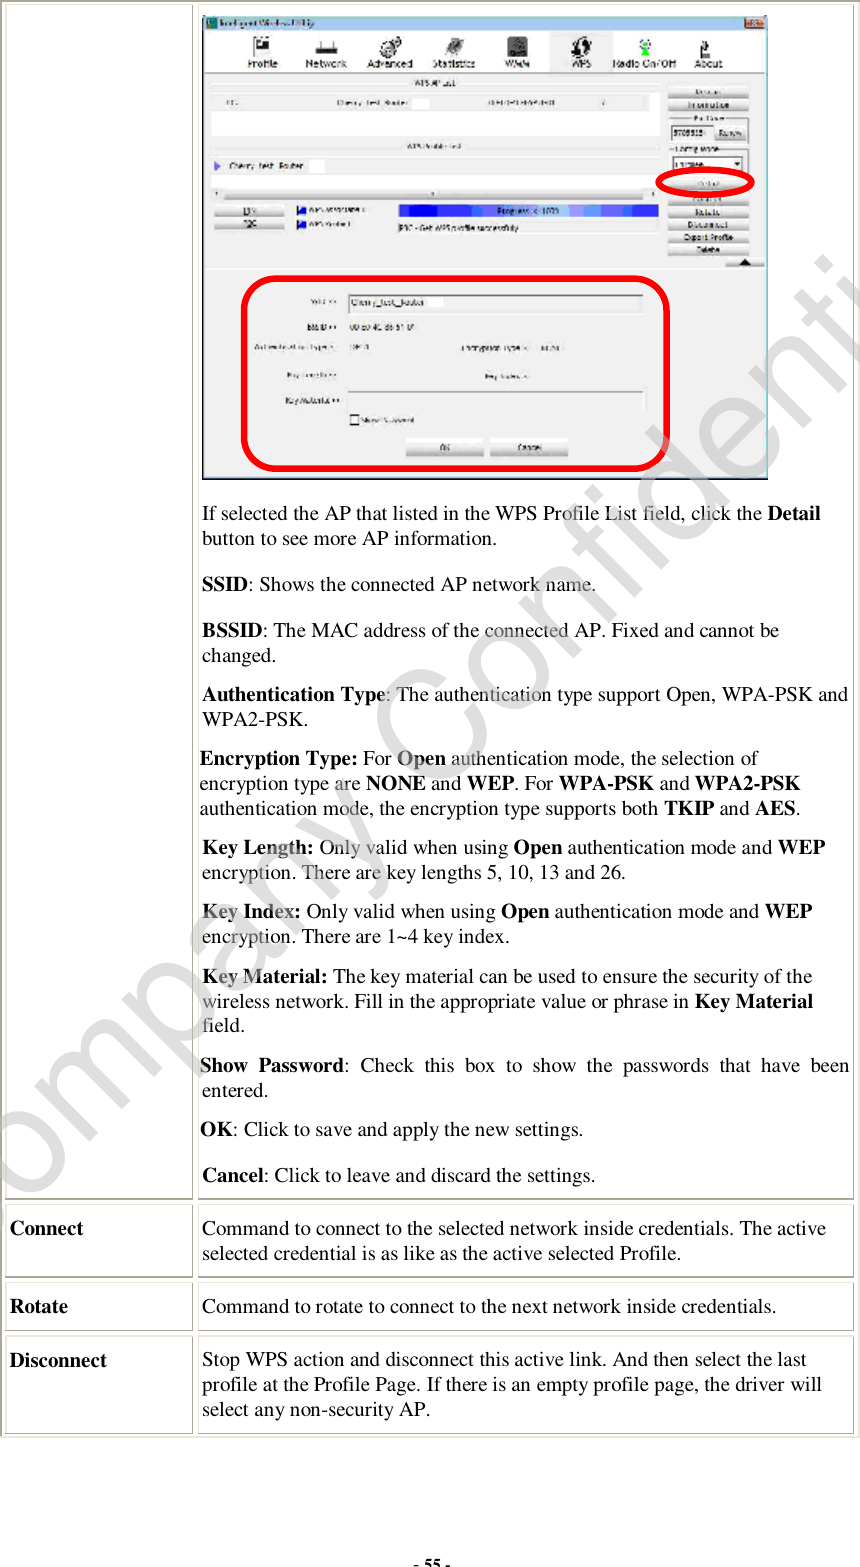  - 55 -  If selected the AP that listed in the WPS Profile List field, click the Detail button to see more AP information. SSID: Shows the connected AP network name. BSSID: The MAC address of the connected AP. Fixed and cannot be changed. Authentication Type: The authentication type support Open, WPA-PSK and WPA2-PSK.  Encryption Type: For Open authentication mode, the selection of encryption type are NONE and WEP. For WPA-PSK and WPA2-PSK authentication mode, the encryption type supports both TKIP and AES. Key Length: Only valid when using Open authentication mode and WEP encryption. There are key lengths 5, 10, 13 and 26. Key Index: Only valid when using Open authentication mode and WEP encryption. There are 1~4 key index.  Key Material: The key material can be used to ensure the security of the wireless network. Fill in the appropriate value or phrase in Key Material field.  Show Password: Check this box to show the passwords that have been entered. OK: Click to save and apply the new settings. Cancel: Click to leave and discard the settings. Connect  Command to connect to the selected network inside credentials. The active selected credential is as like as the active selected Profile. Rotate  Command to rotate to connect to the next network inside credentials. Disconnect  Stop WPS action and disconnect this active link. And then select the last profile at the Profile Page. If there is an empty profile page, the driver will select any non-security AP. Company Confidential